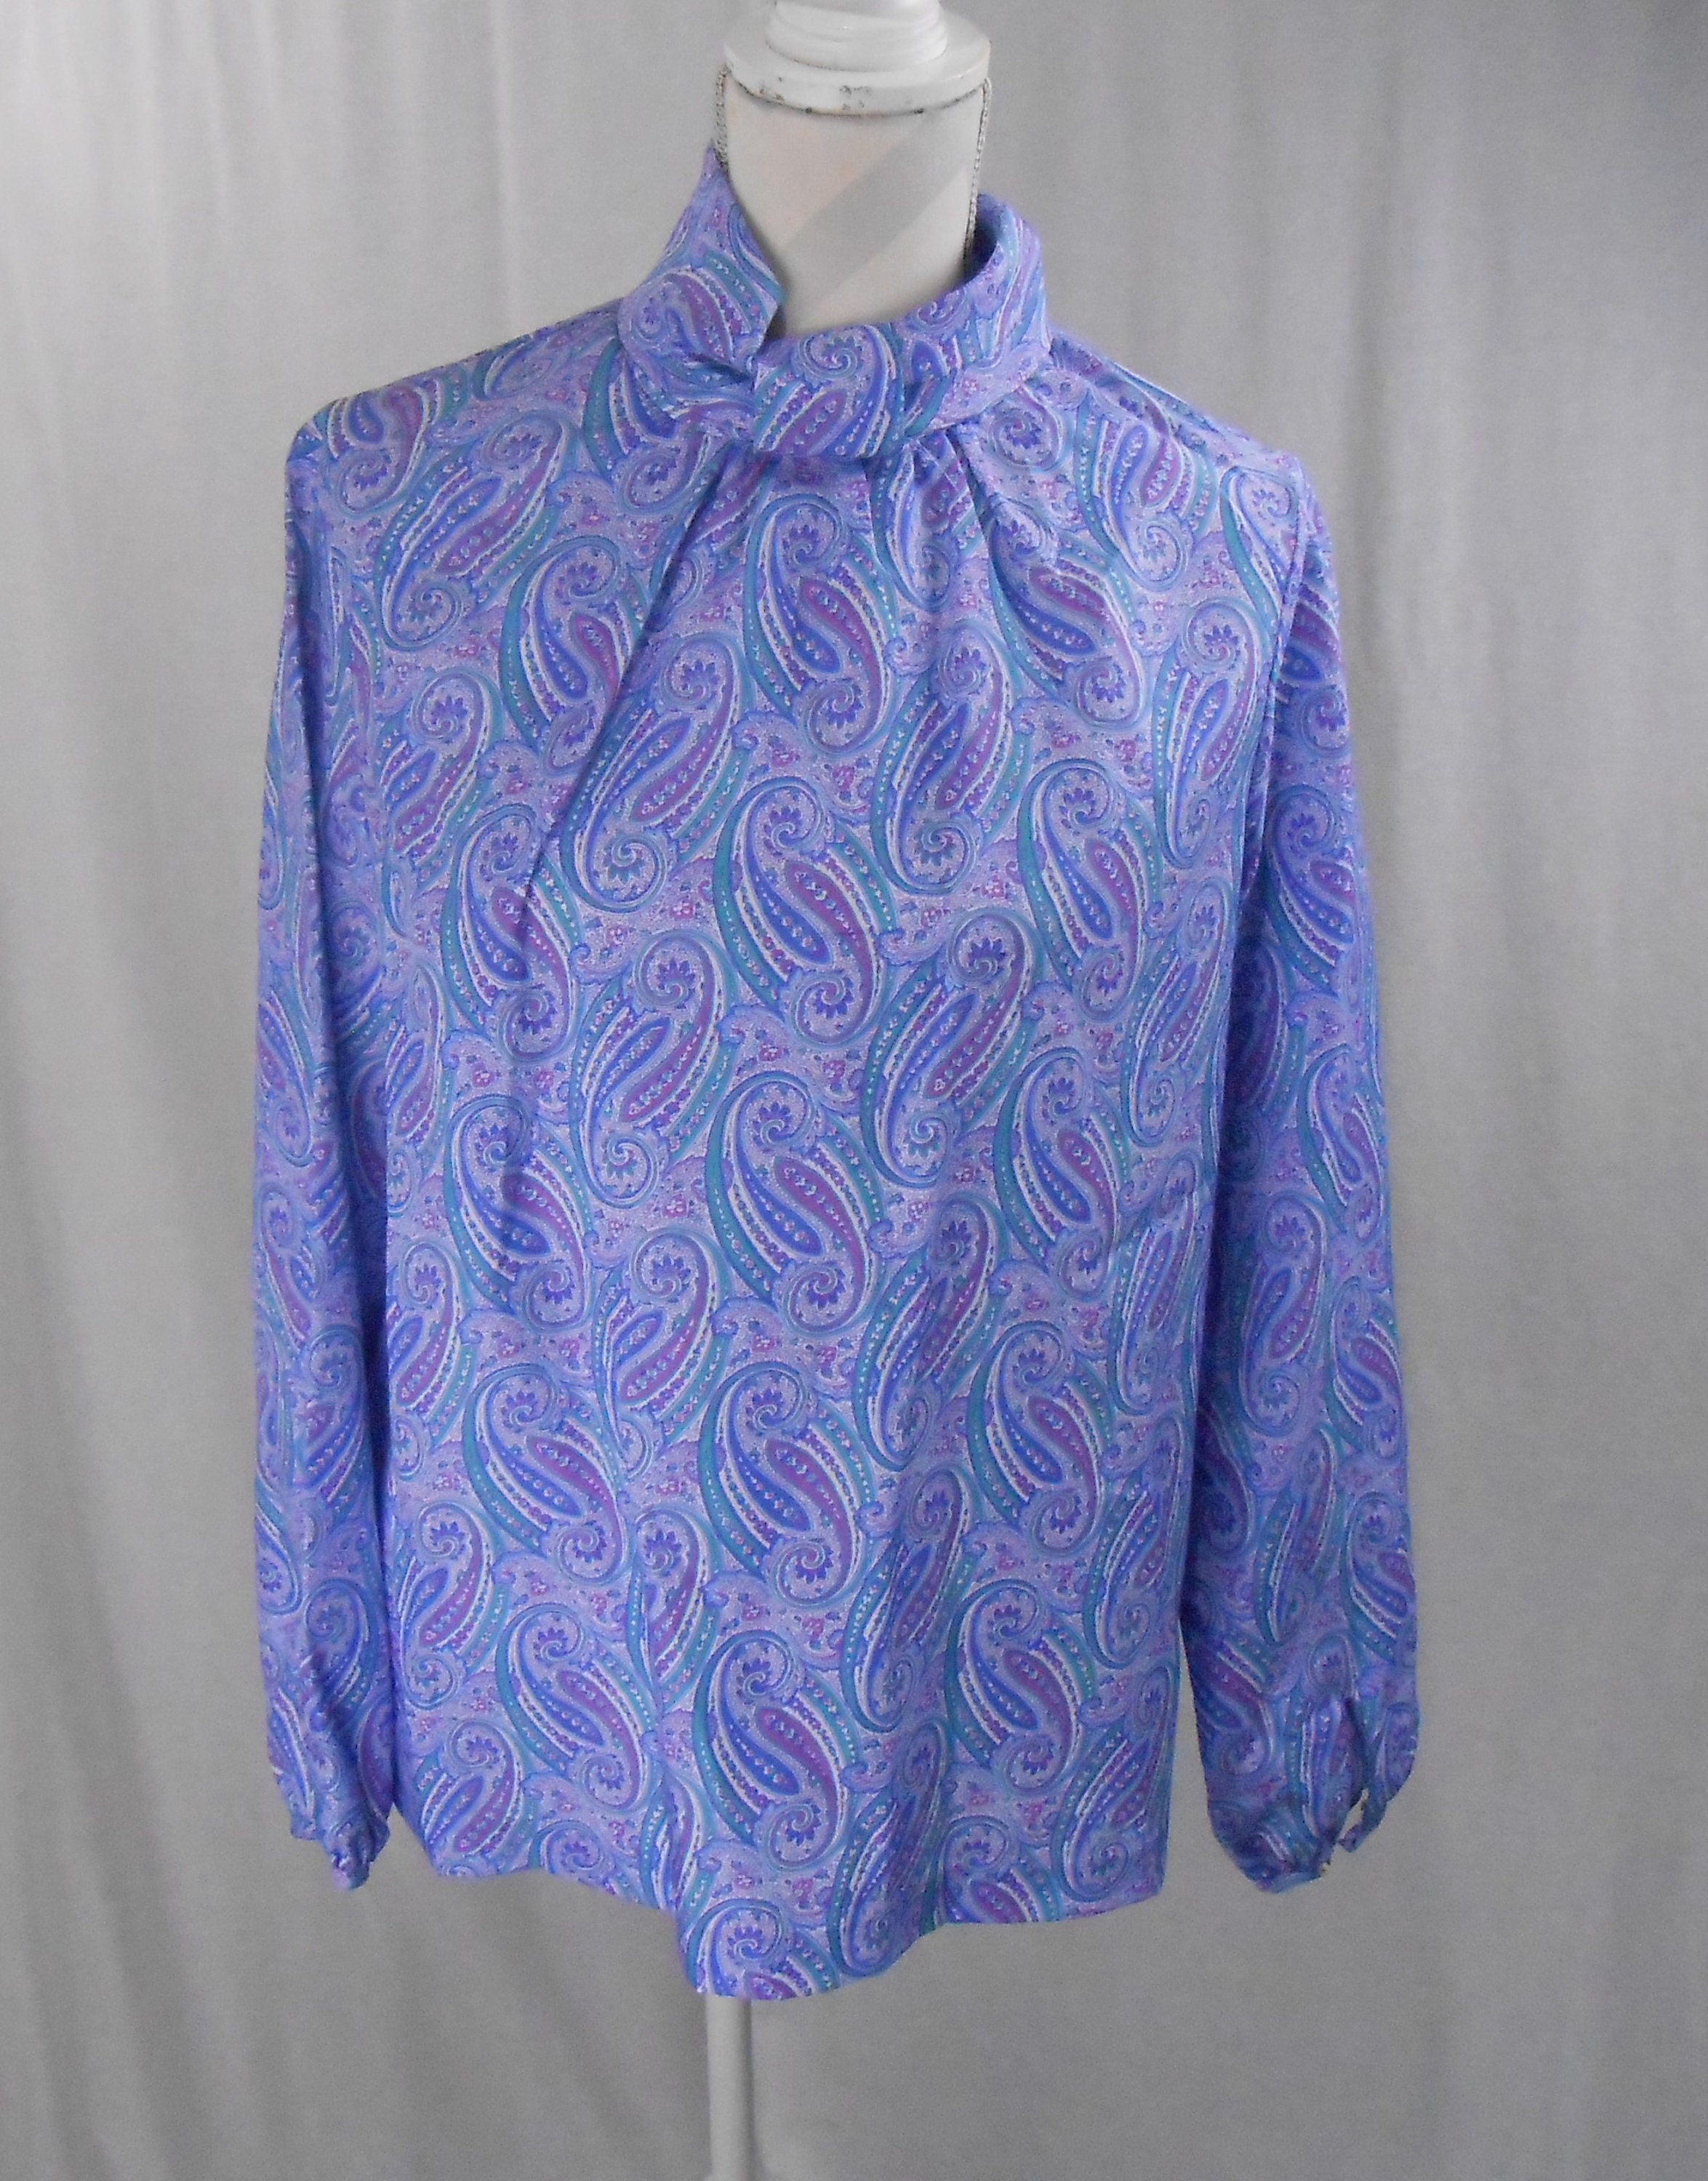 Vintage 1970's/80's Blouse by Lucky Winner - Etsy